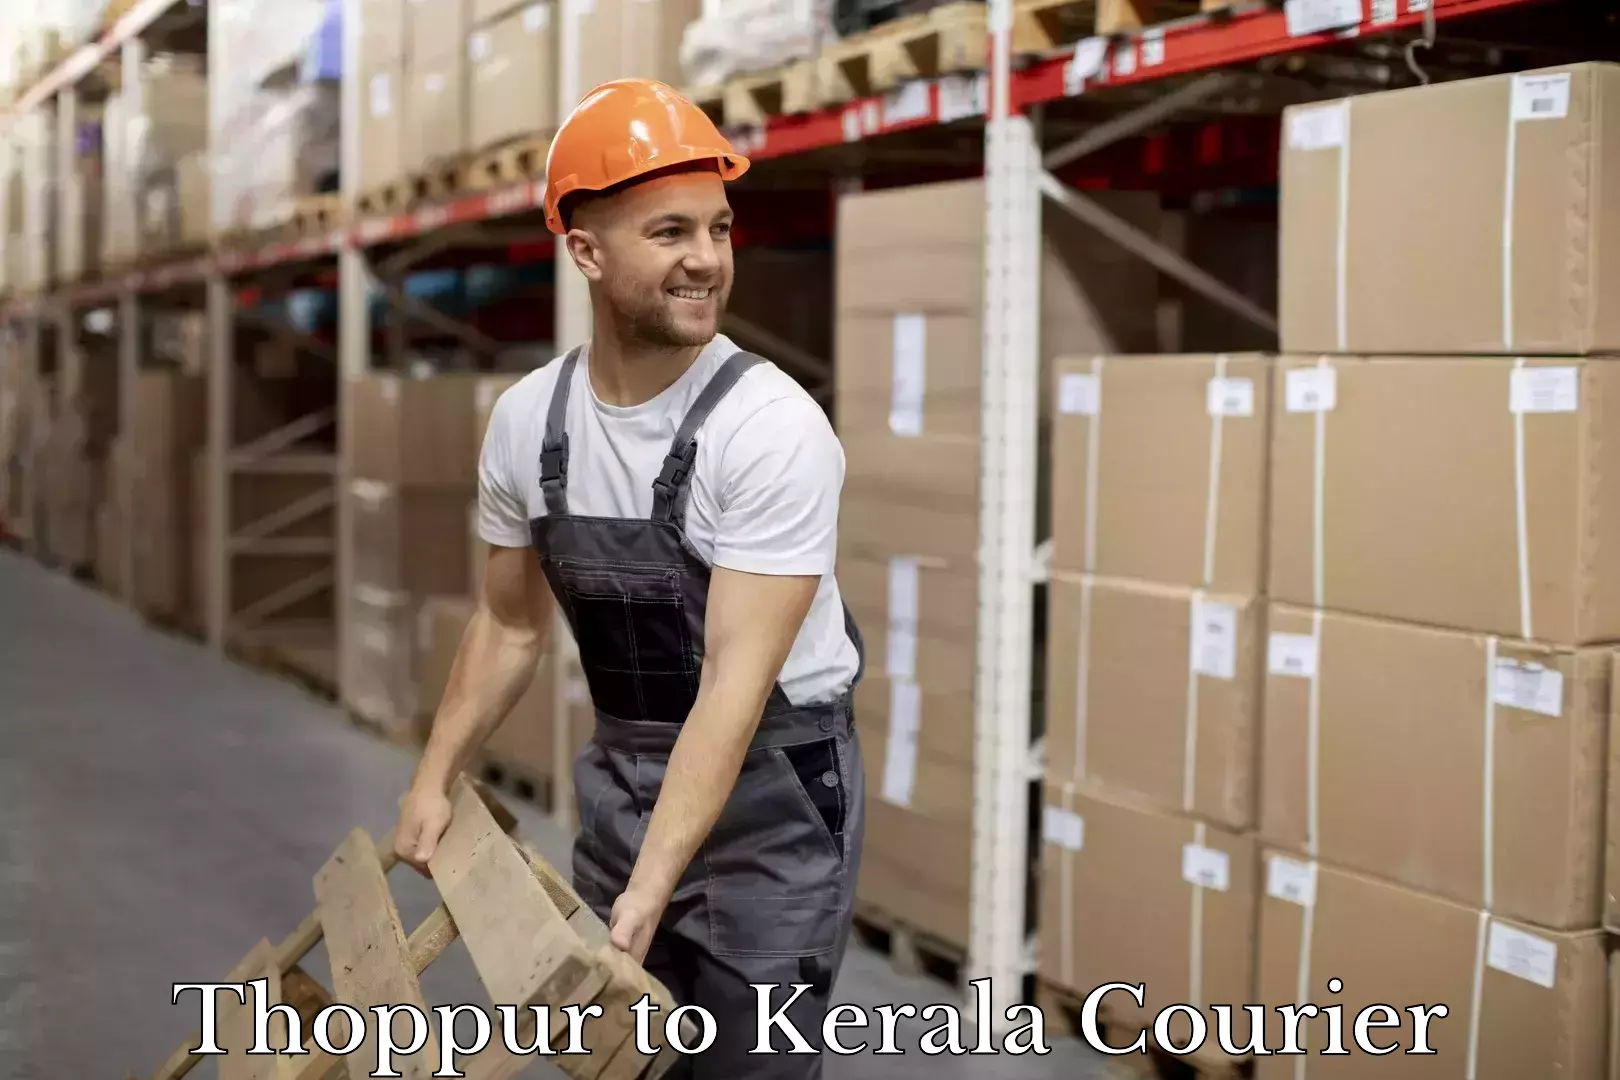 Global courier networks Thoppur to Kerala